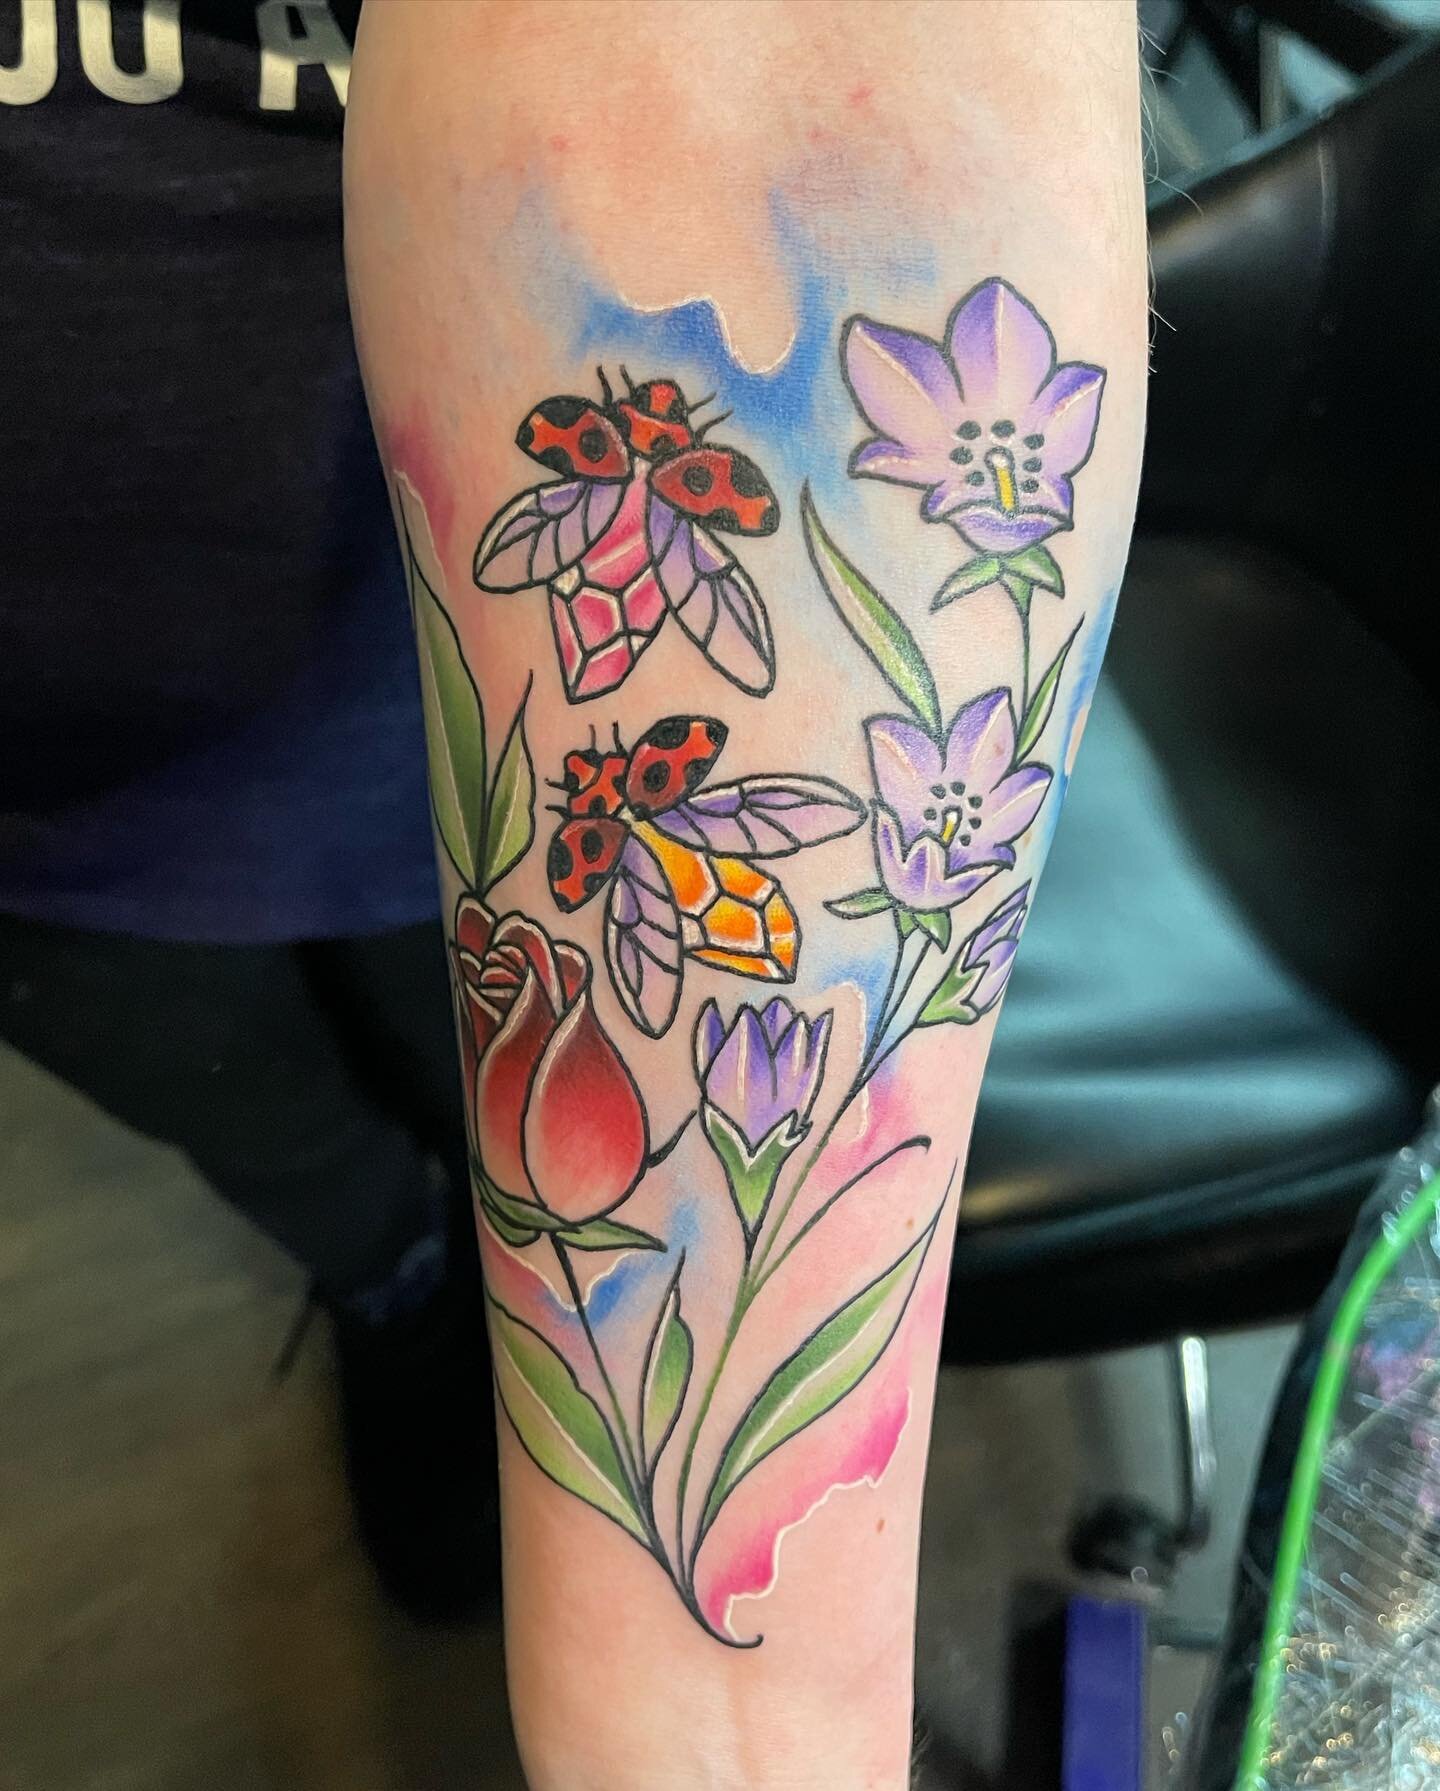 Fun bit of color today ❤️✍️ link for setting up appointments in bio thanks for looking! #art #artist #tattoo #watercolortattoo #ladybug #girlswithtattoos #tomdykerstattoos #colortattoo